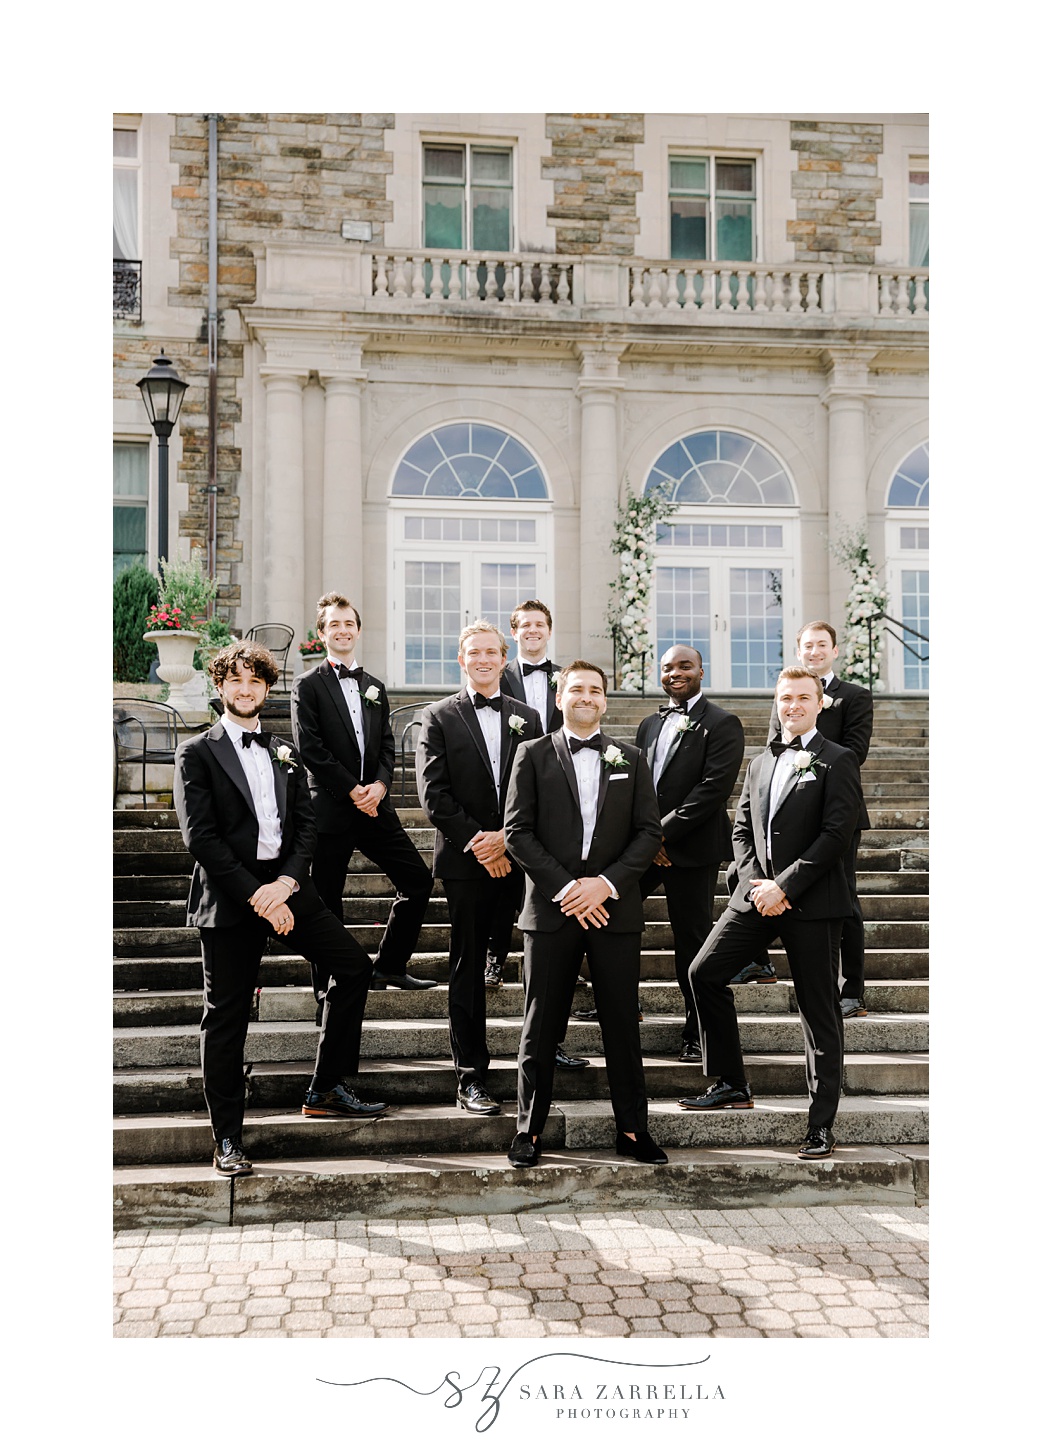 groom and groomsmen in classic tuxes stand on staircase at Aldrich Mansion